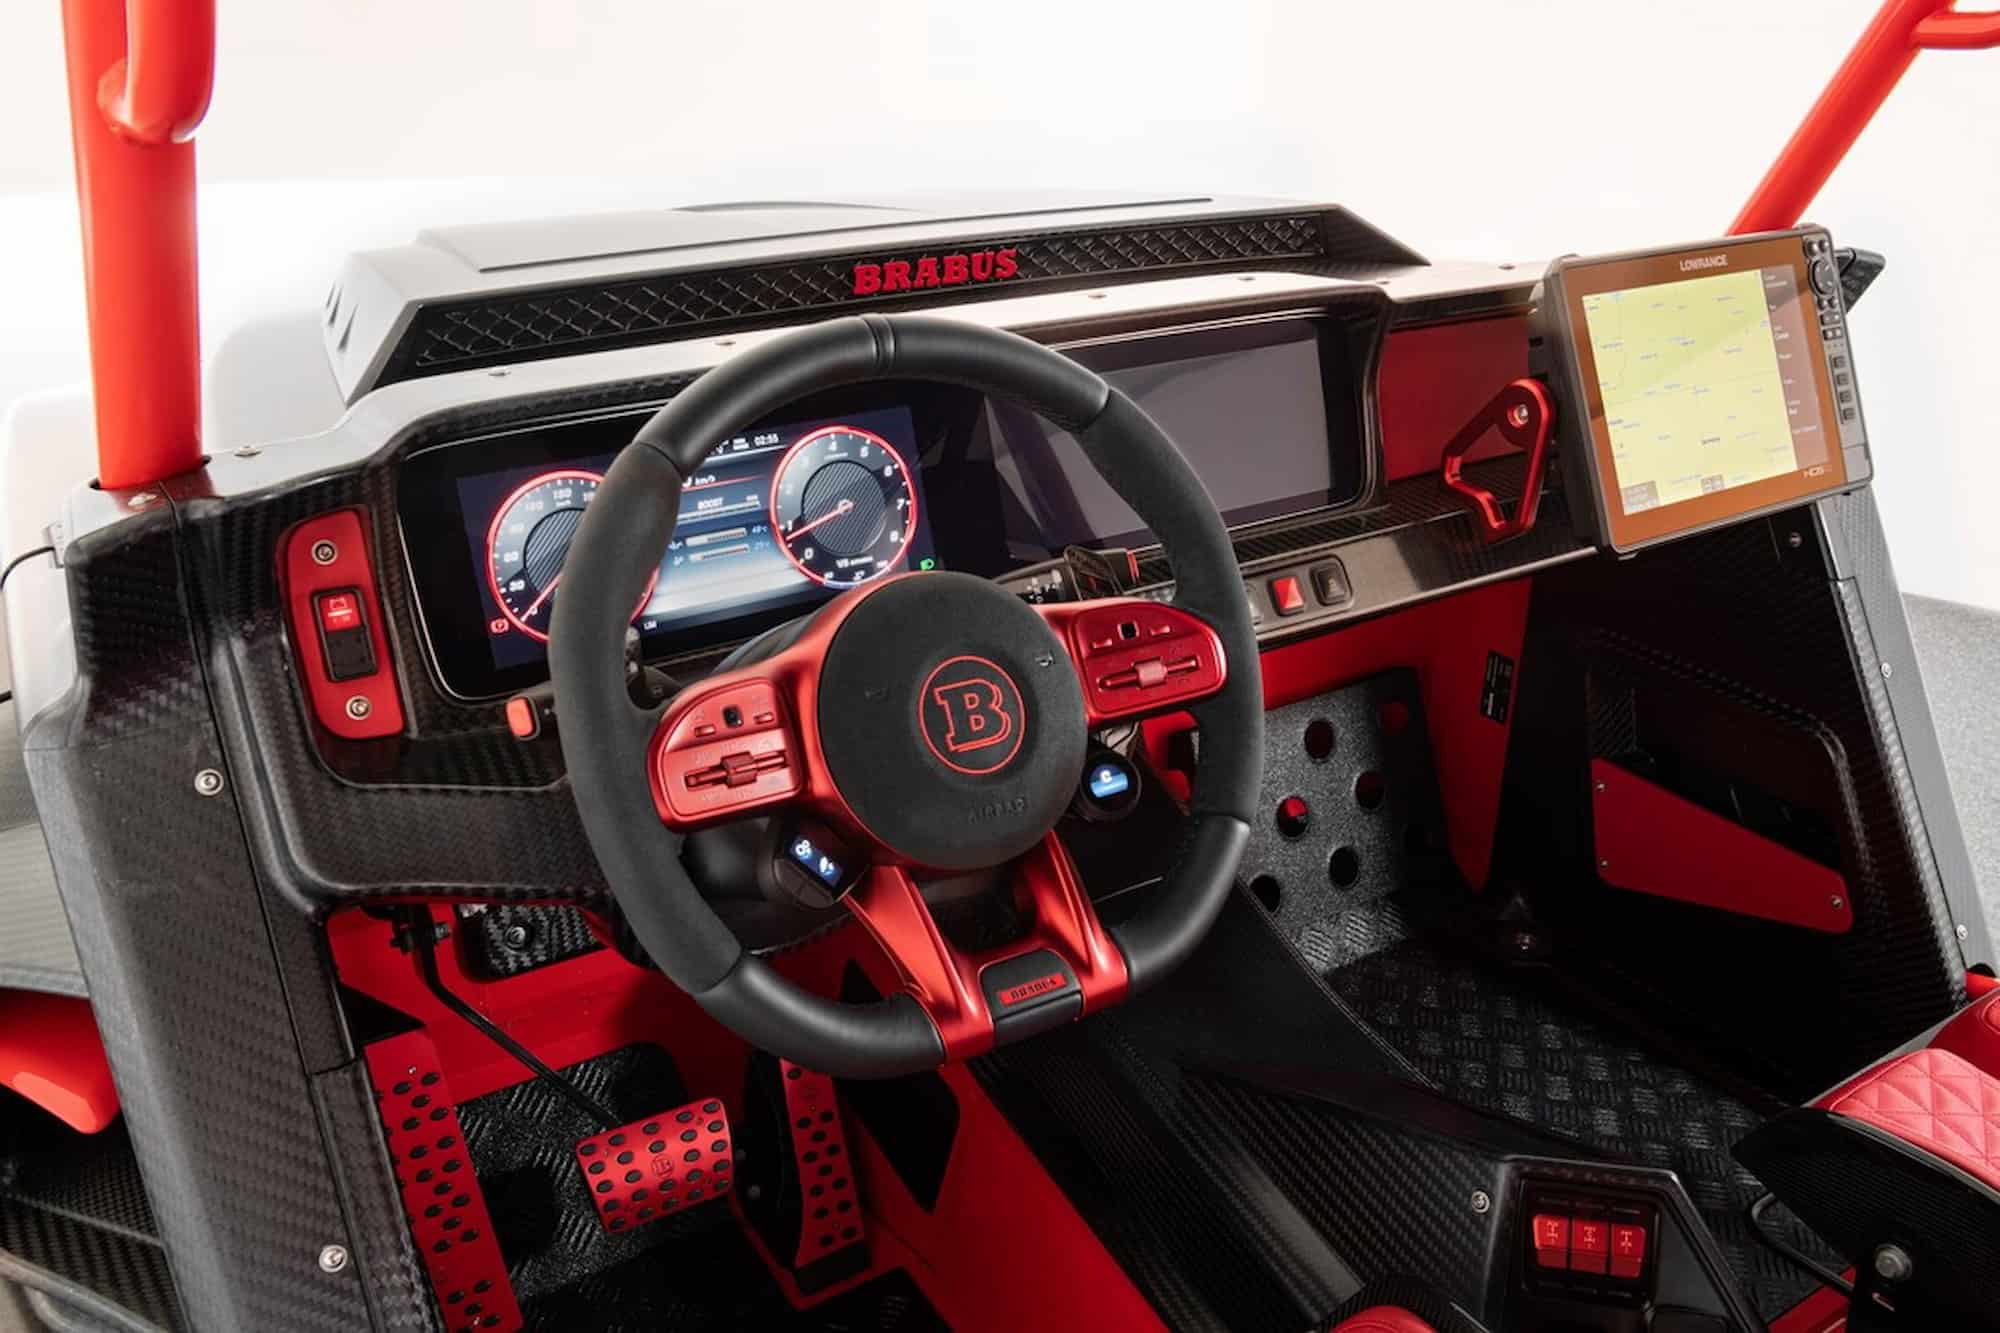 spend your weekends in the desert with the brabus crawler a dune racer with g wagen looks 22